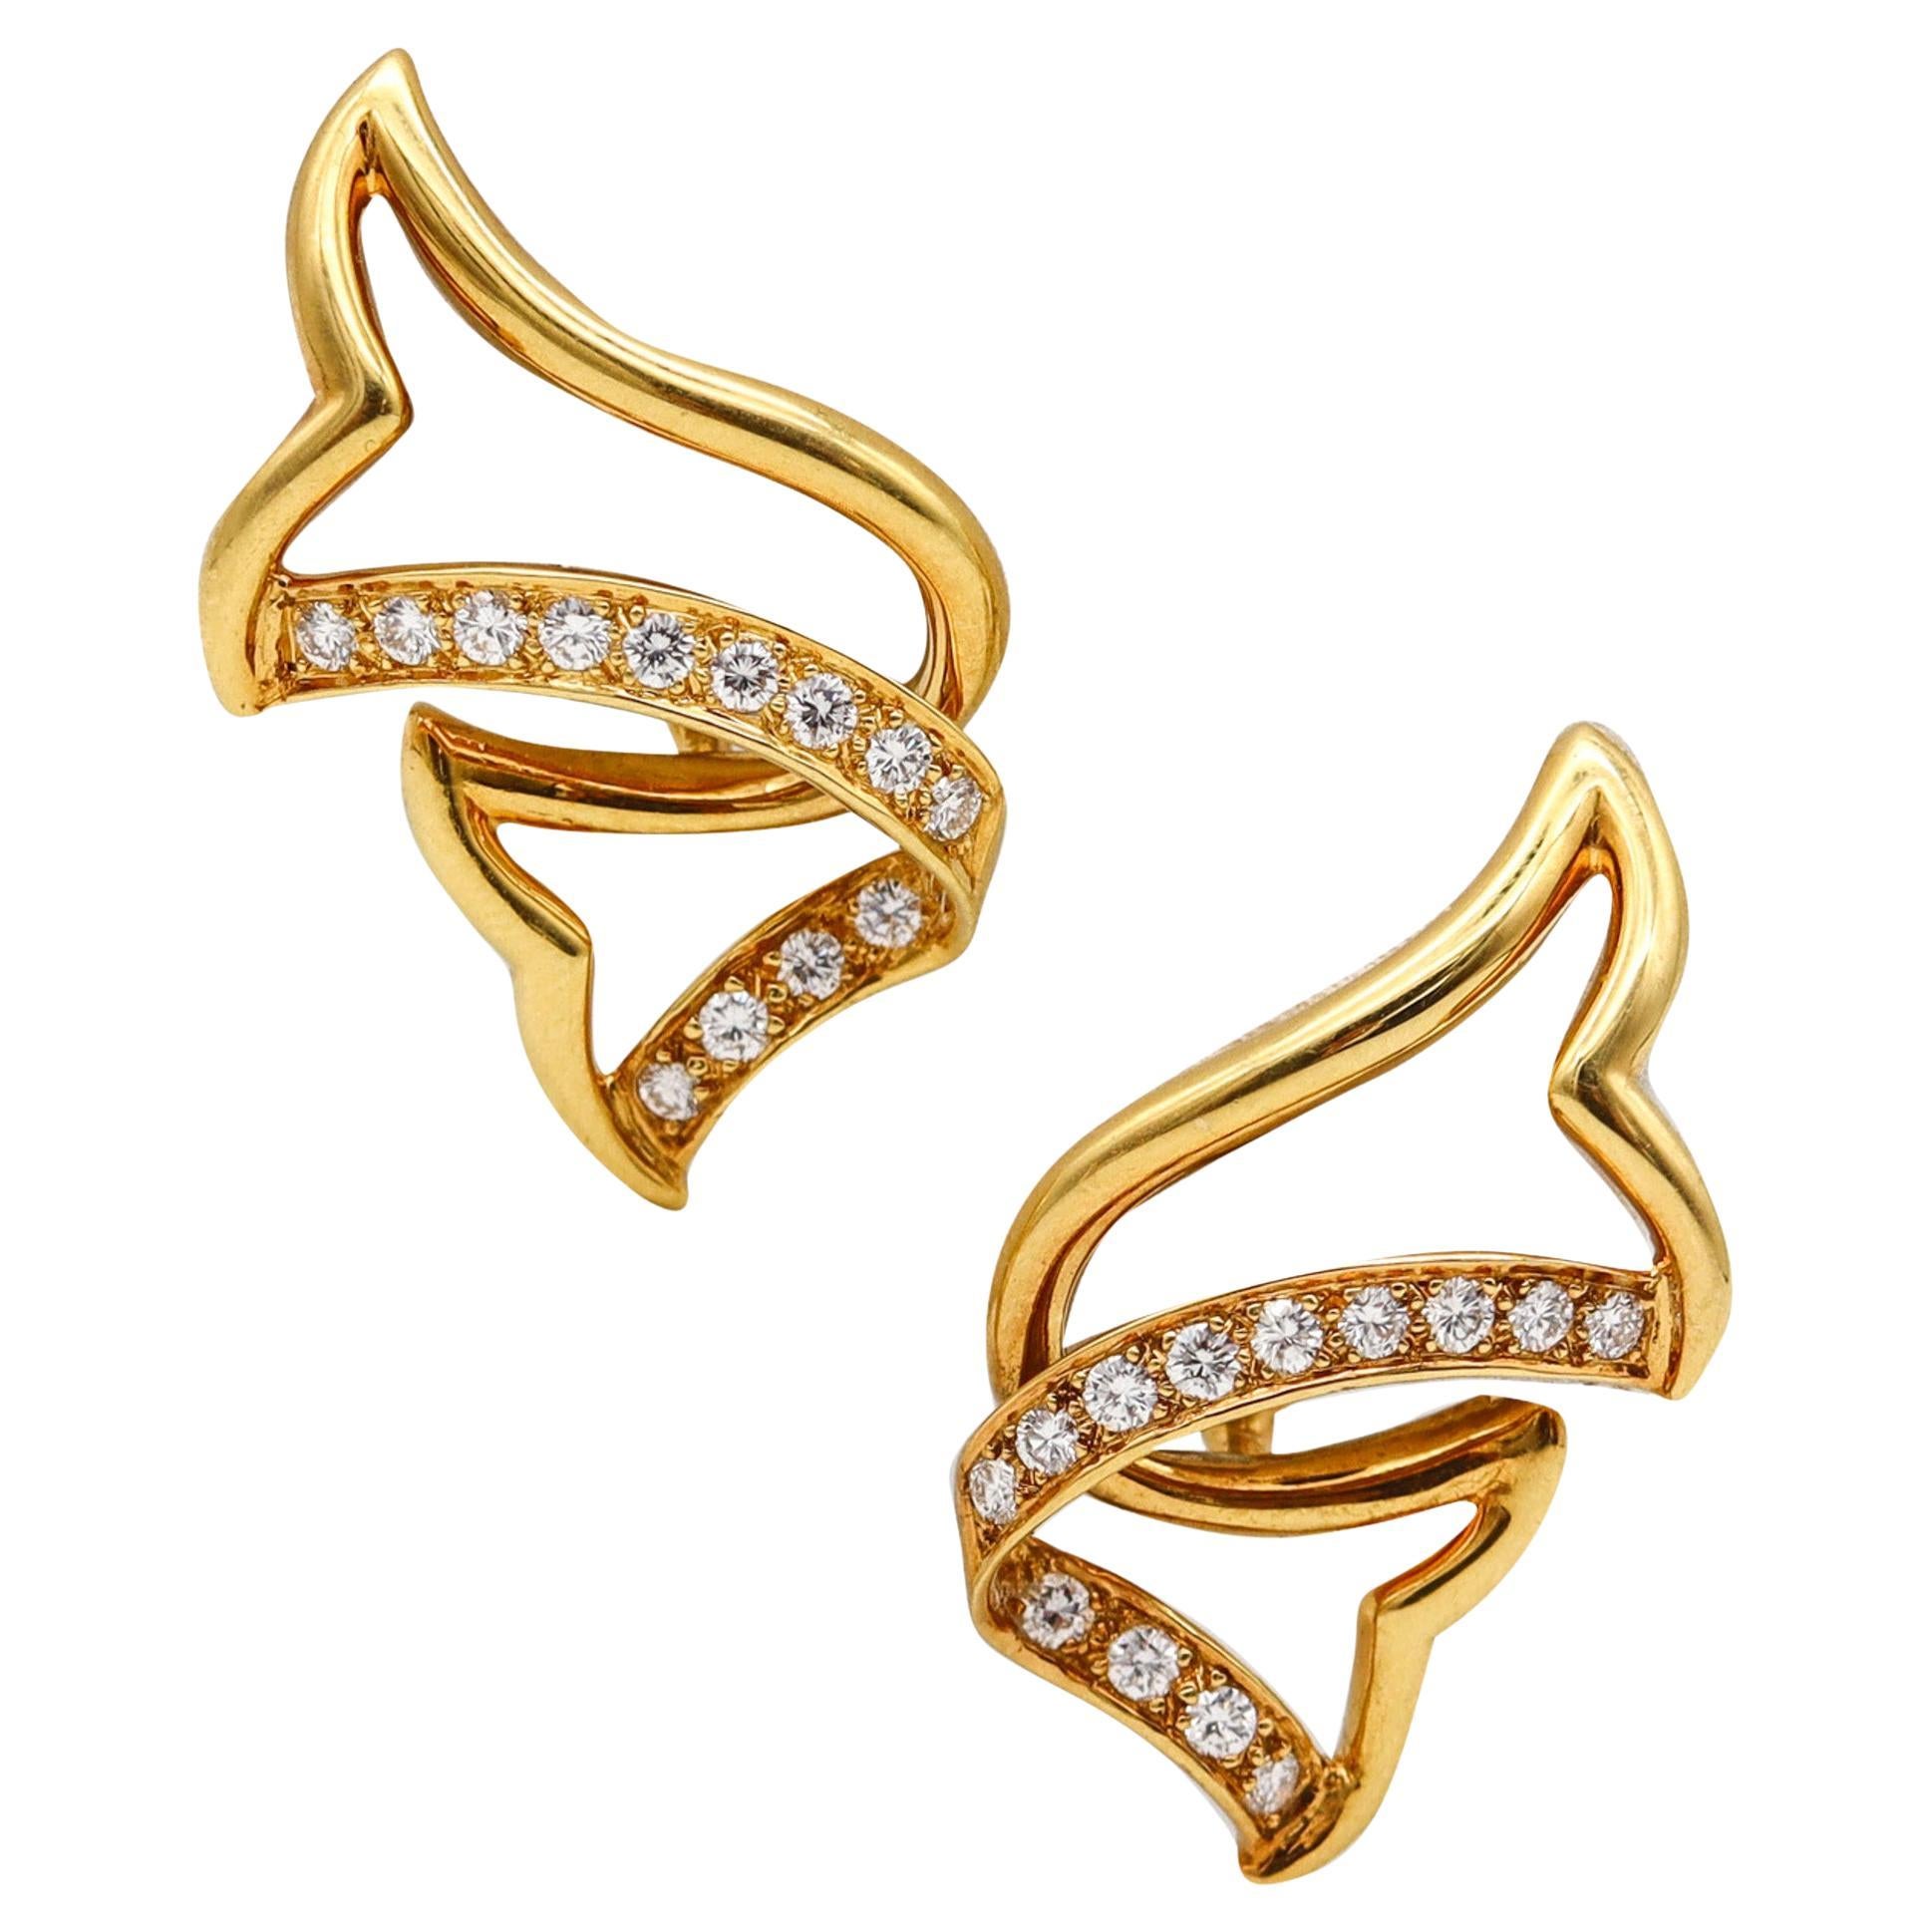 Sonia Bitton Sculptural Free Form Earrings In 18Kt Gold With 1.58 Ctw Diamonds For Sale